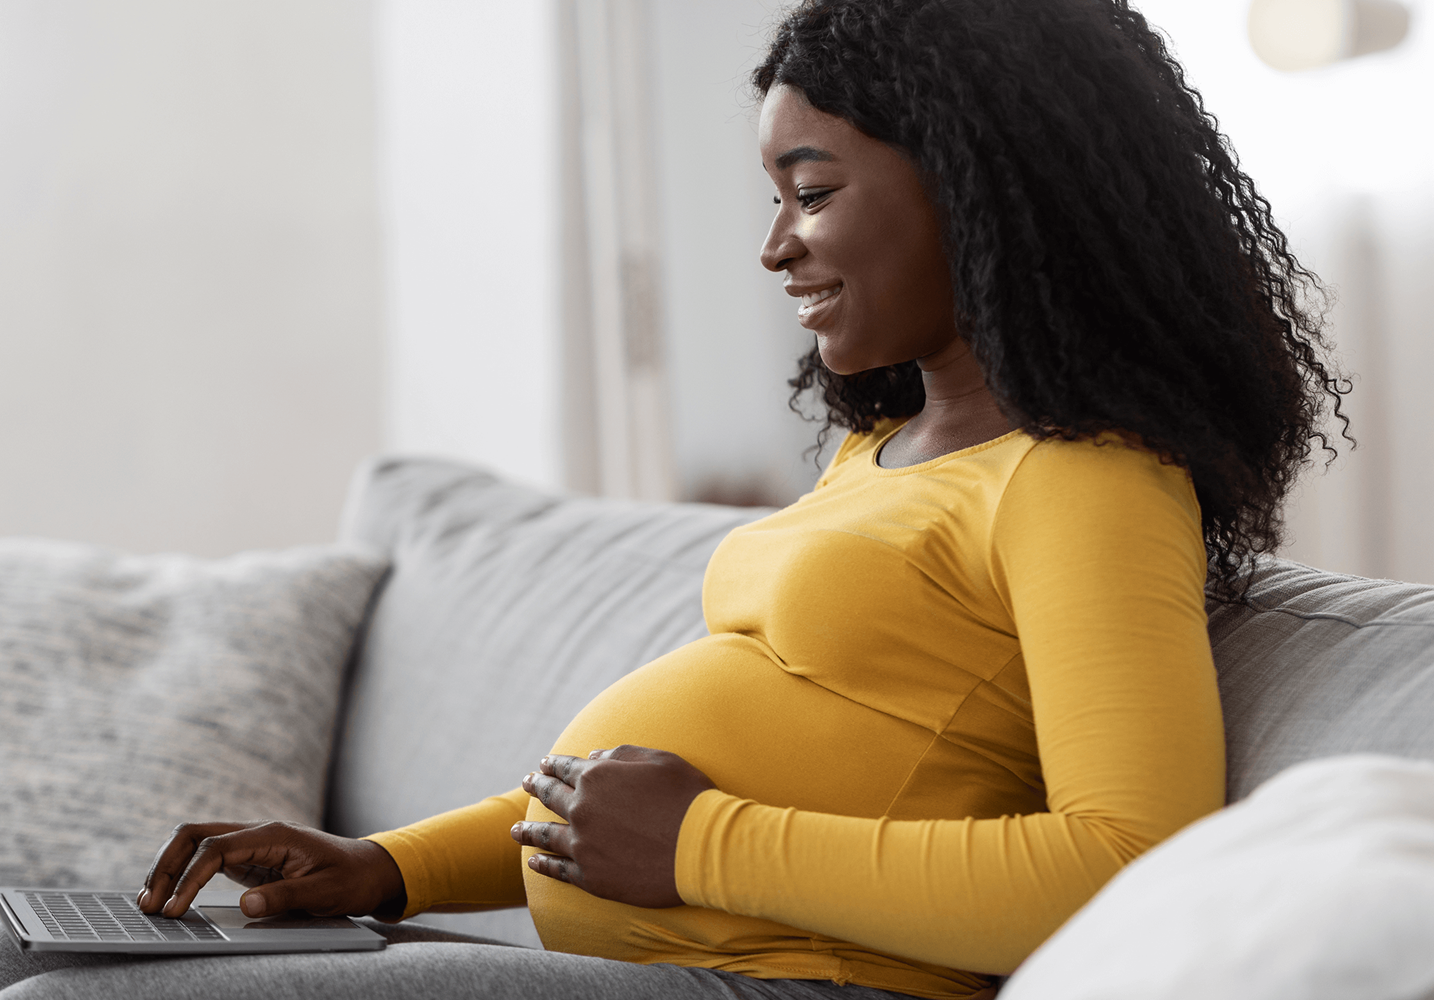 Black pregnant woman using laptop at home.